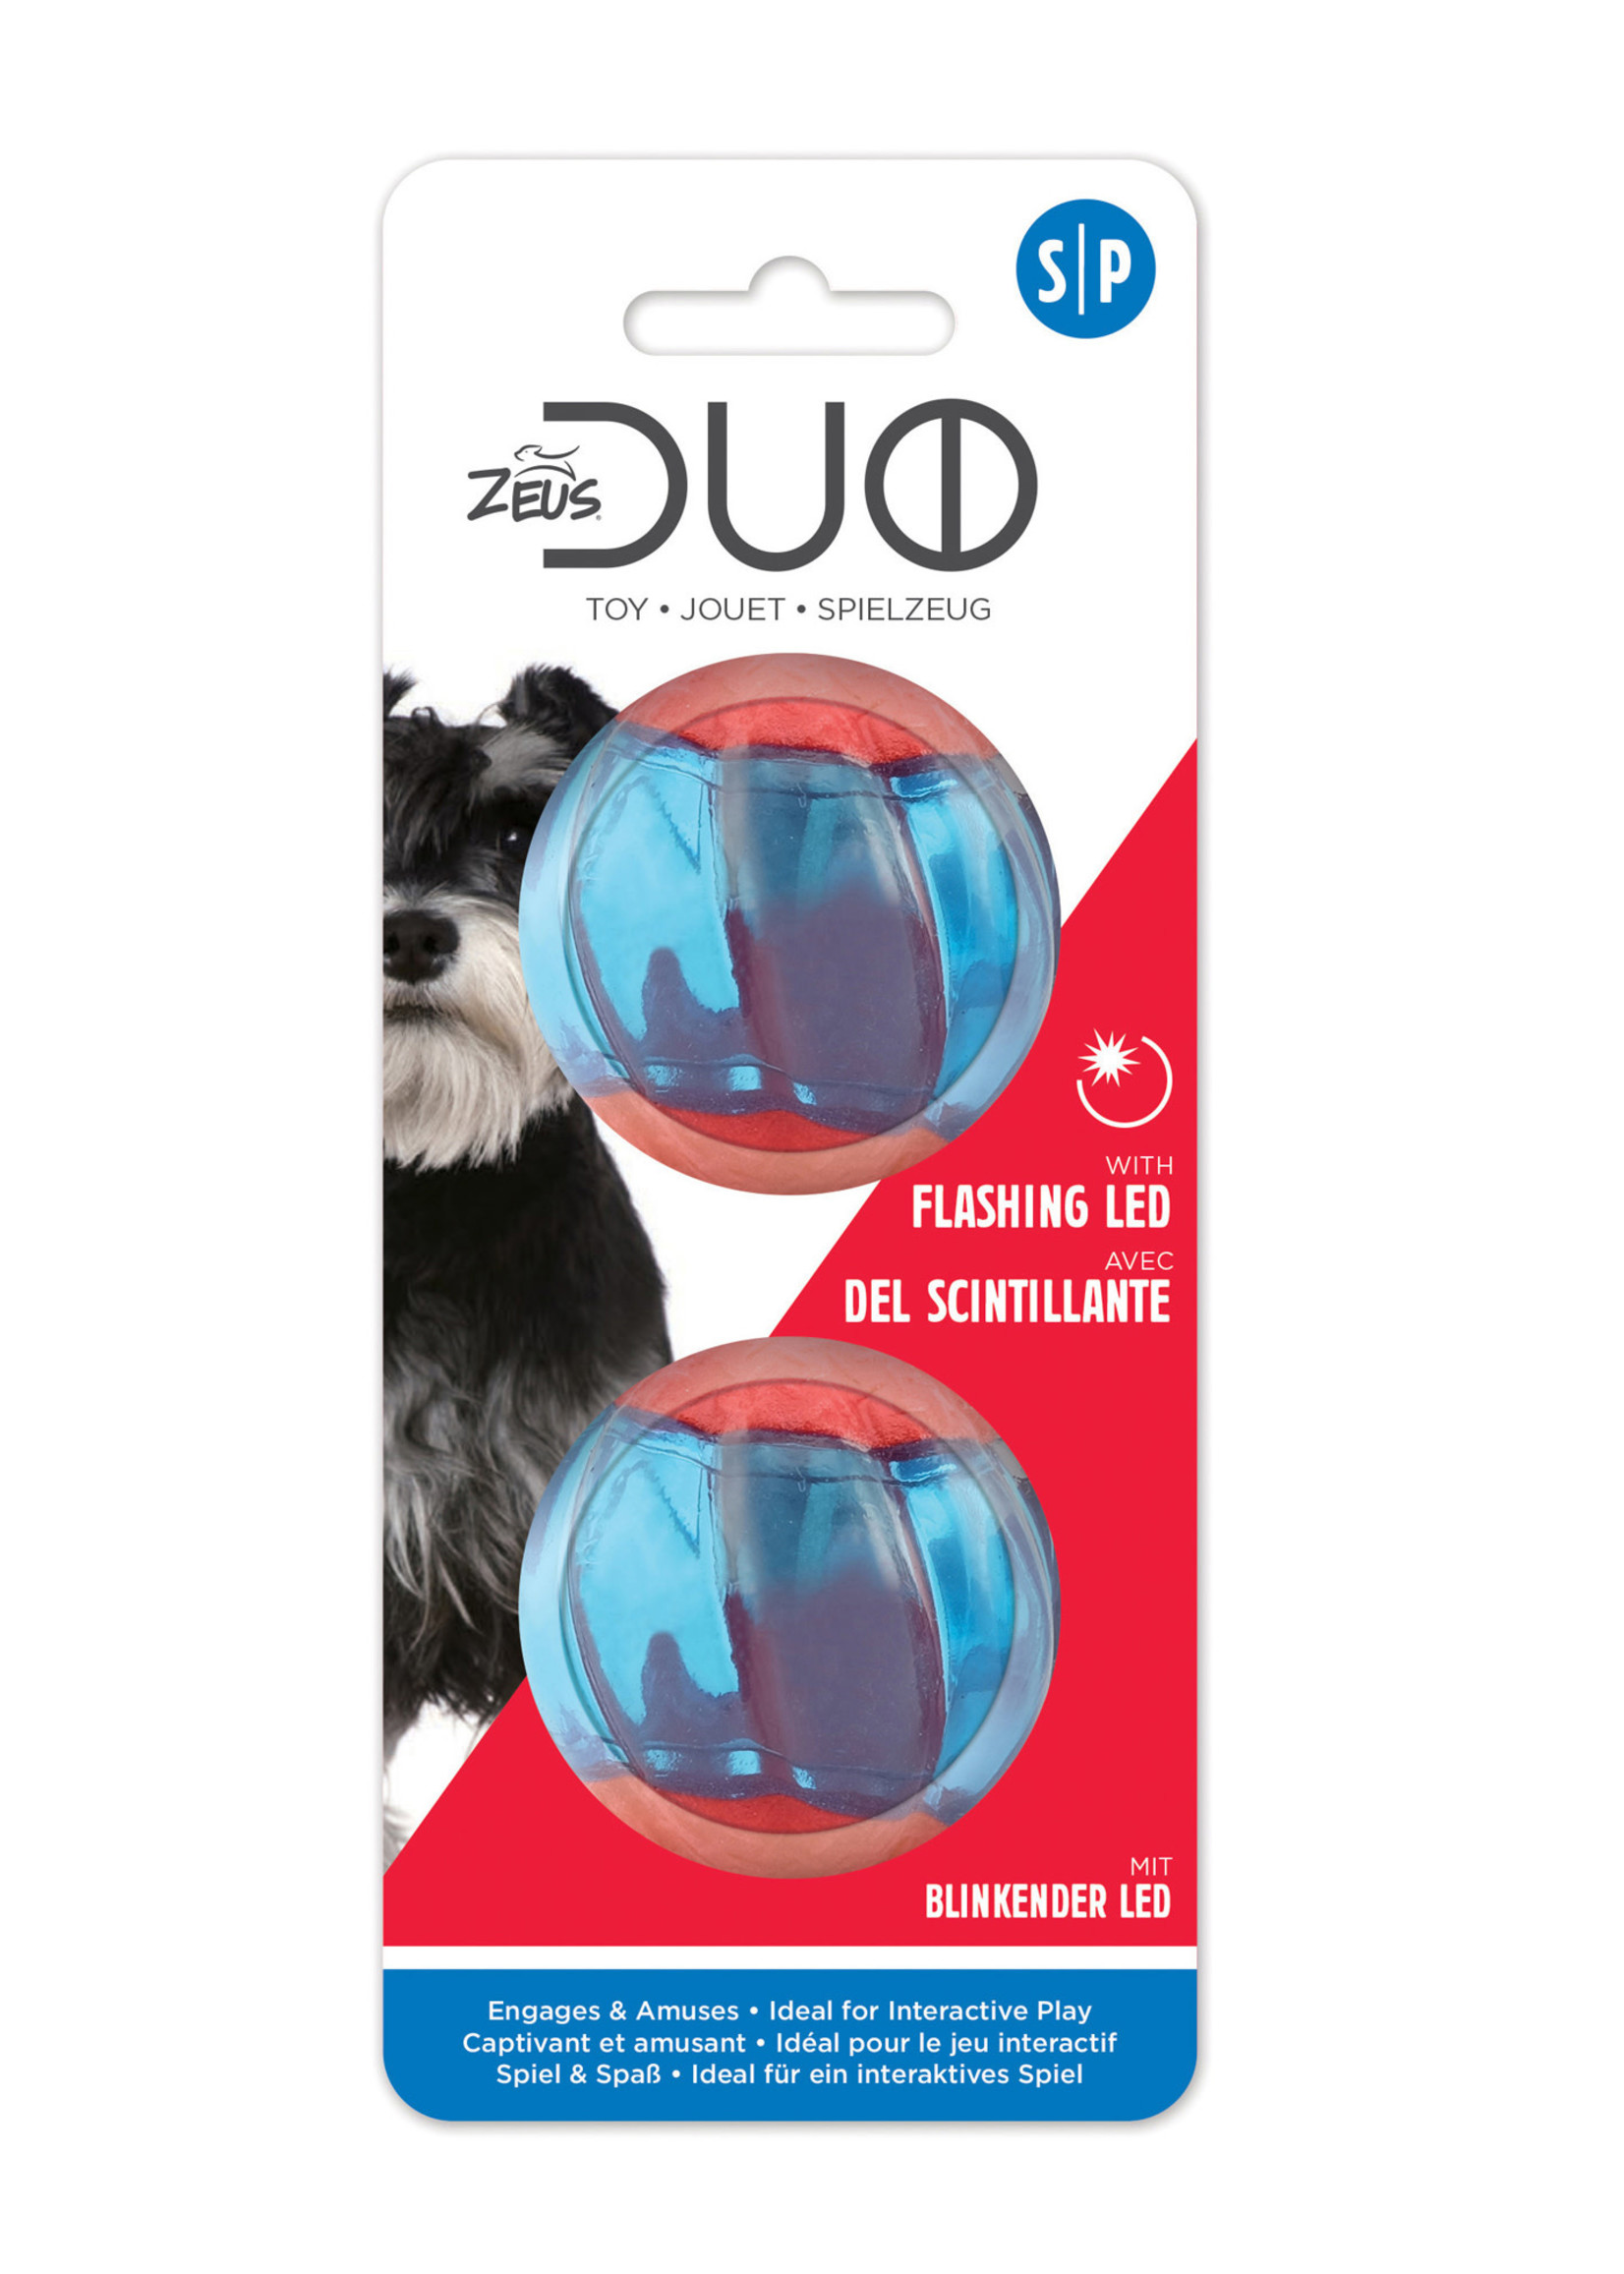 Zeus Zeus Duo Ball, 2" with LED, 2-pack